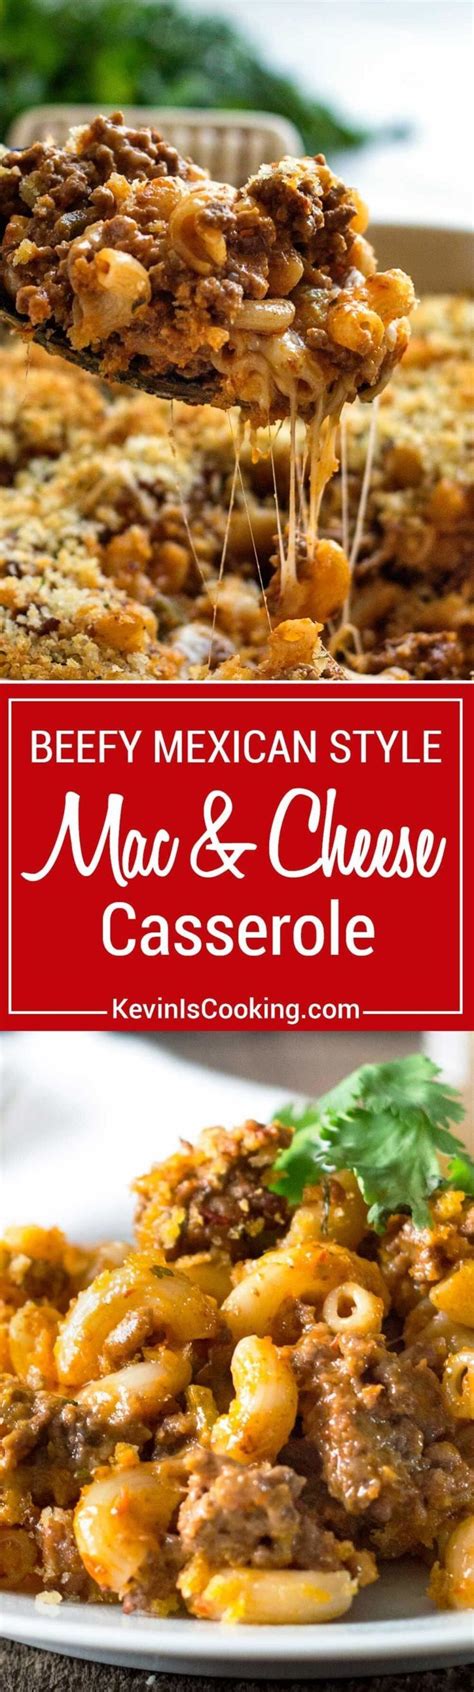 Not to be cheesy, but we might be in love. This stepped up Beefy Mac and Cheese Casserole goes a step ...